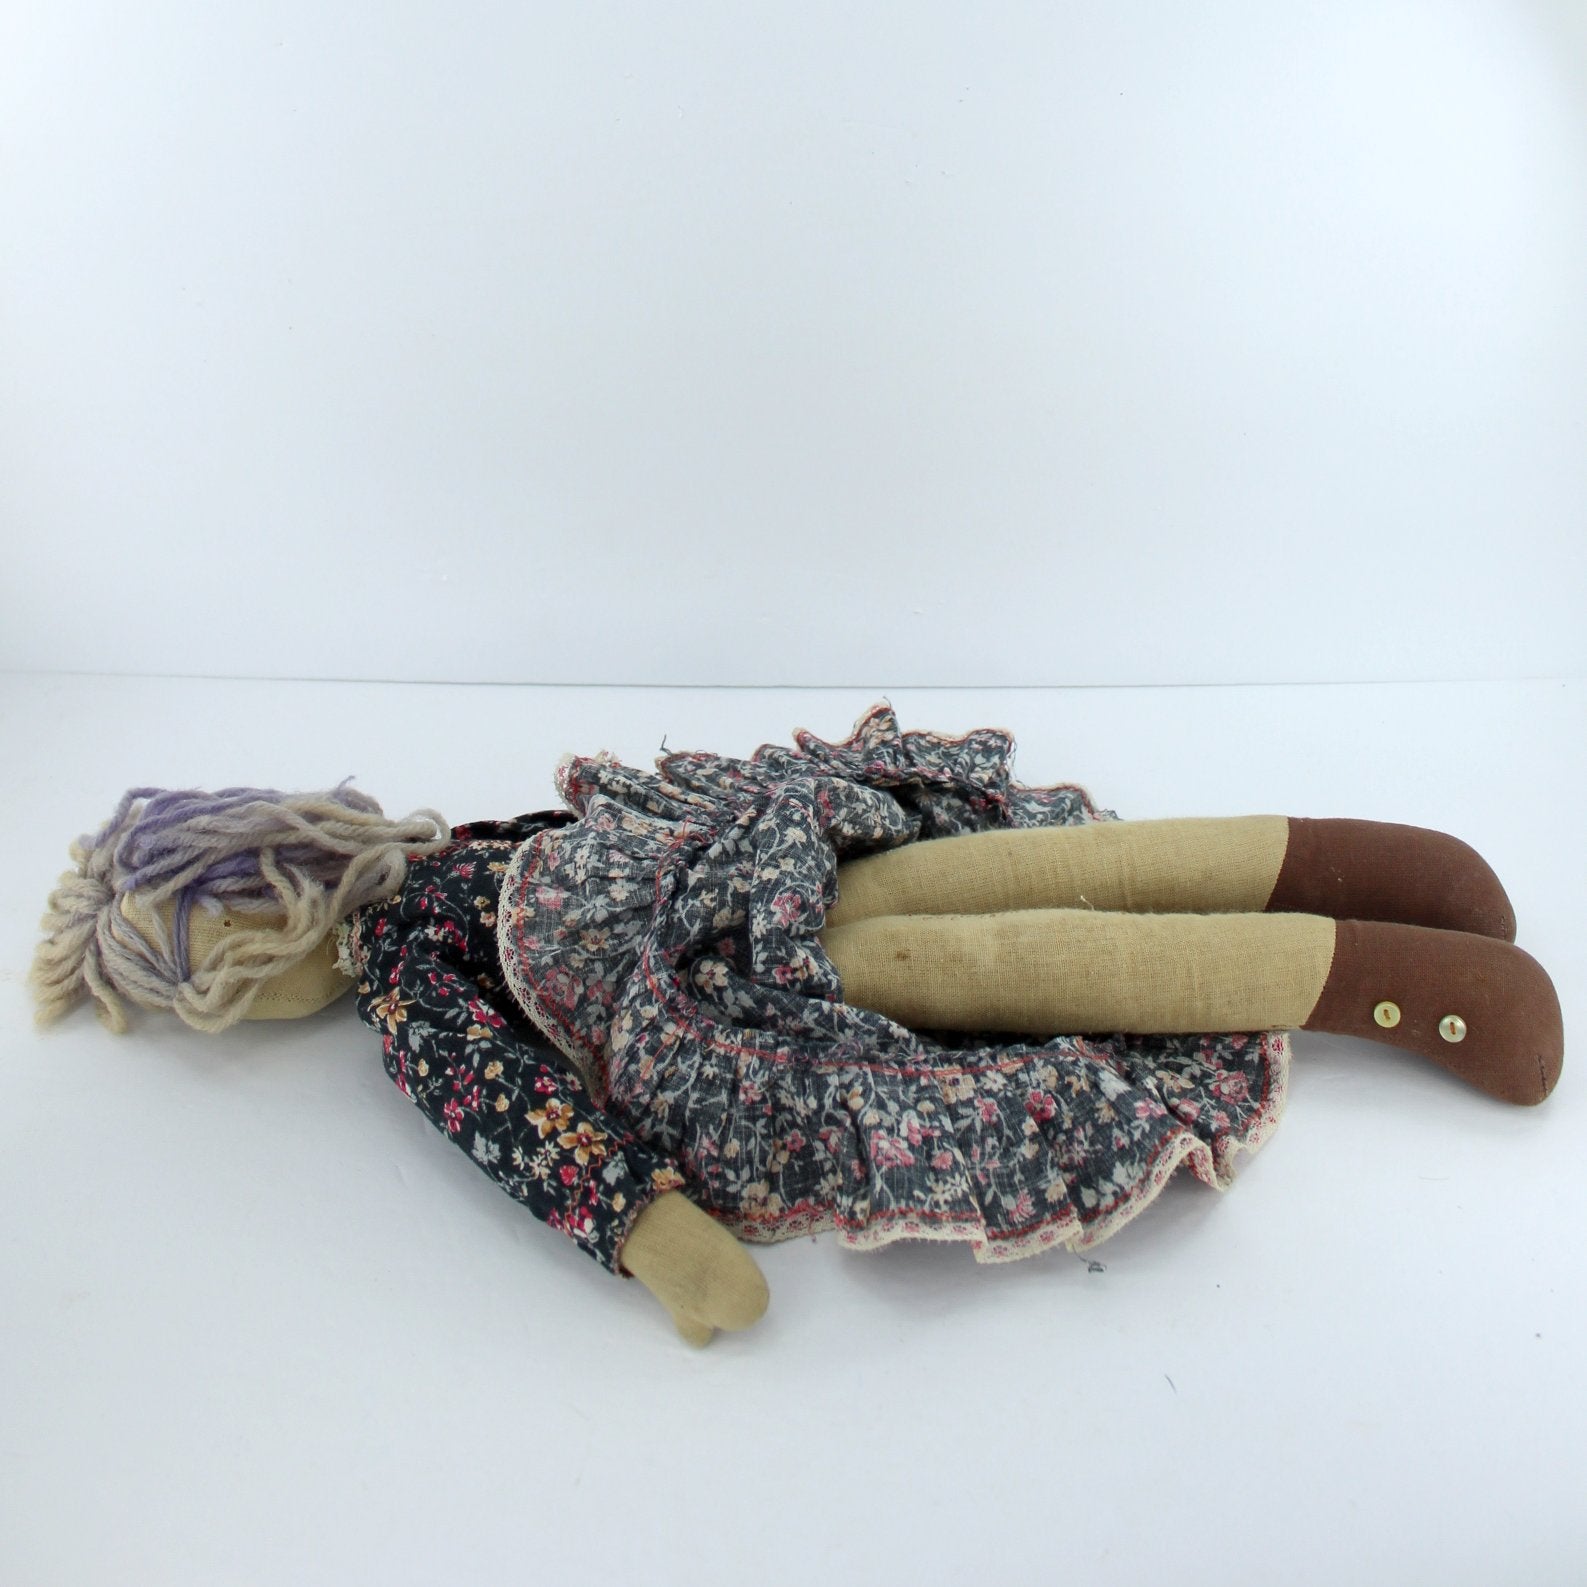 Collection 2 Primitive Design Dolls Plantation and Calico Dressed Embroidered Faces Cotton Fabrics yarn hair needs tlc